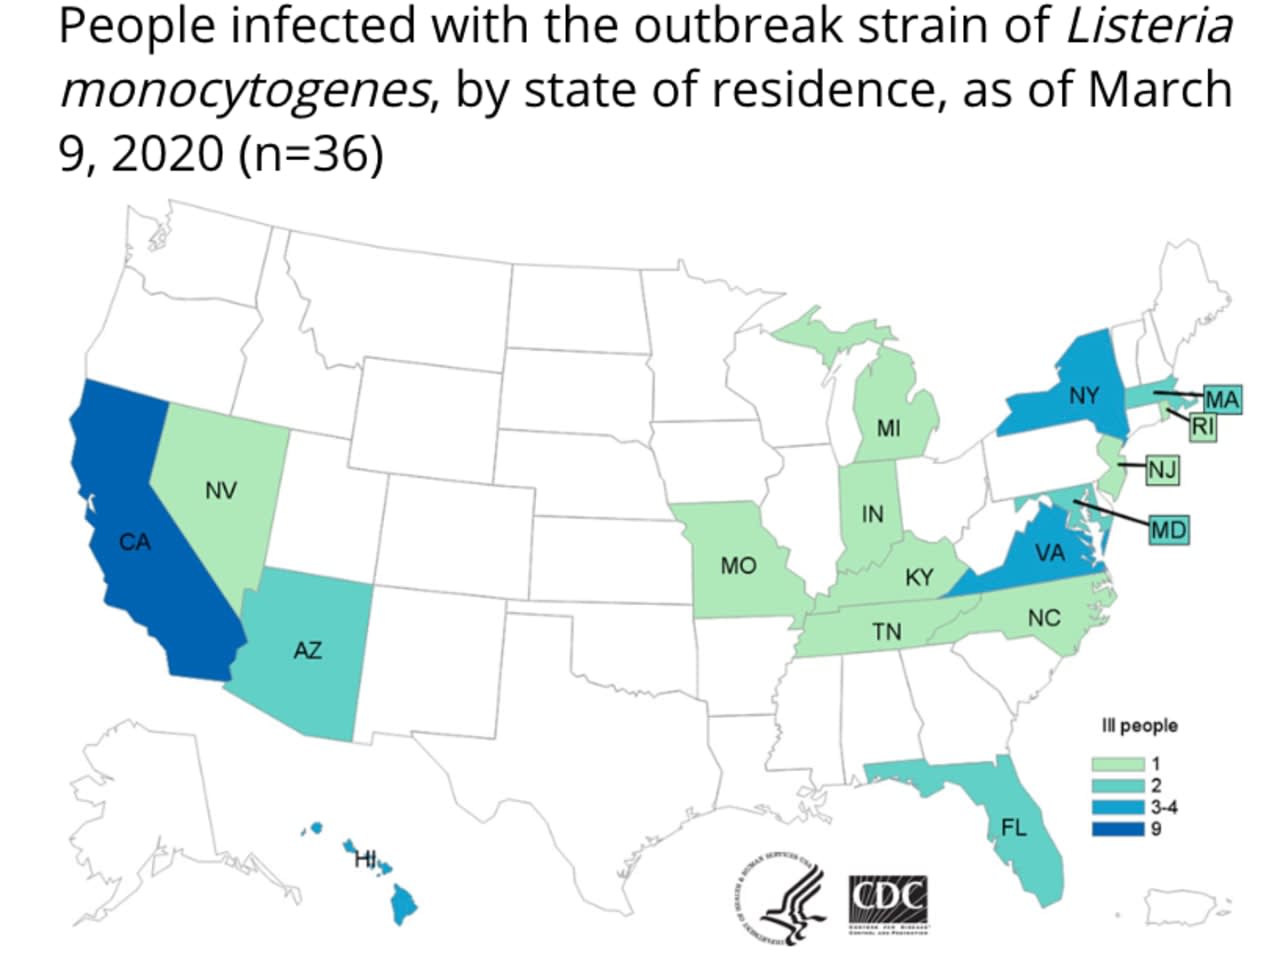 A look at states where people have become infected.